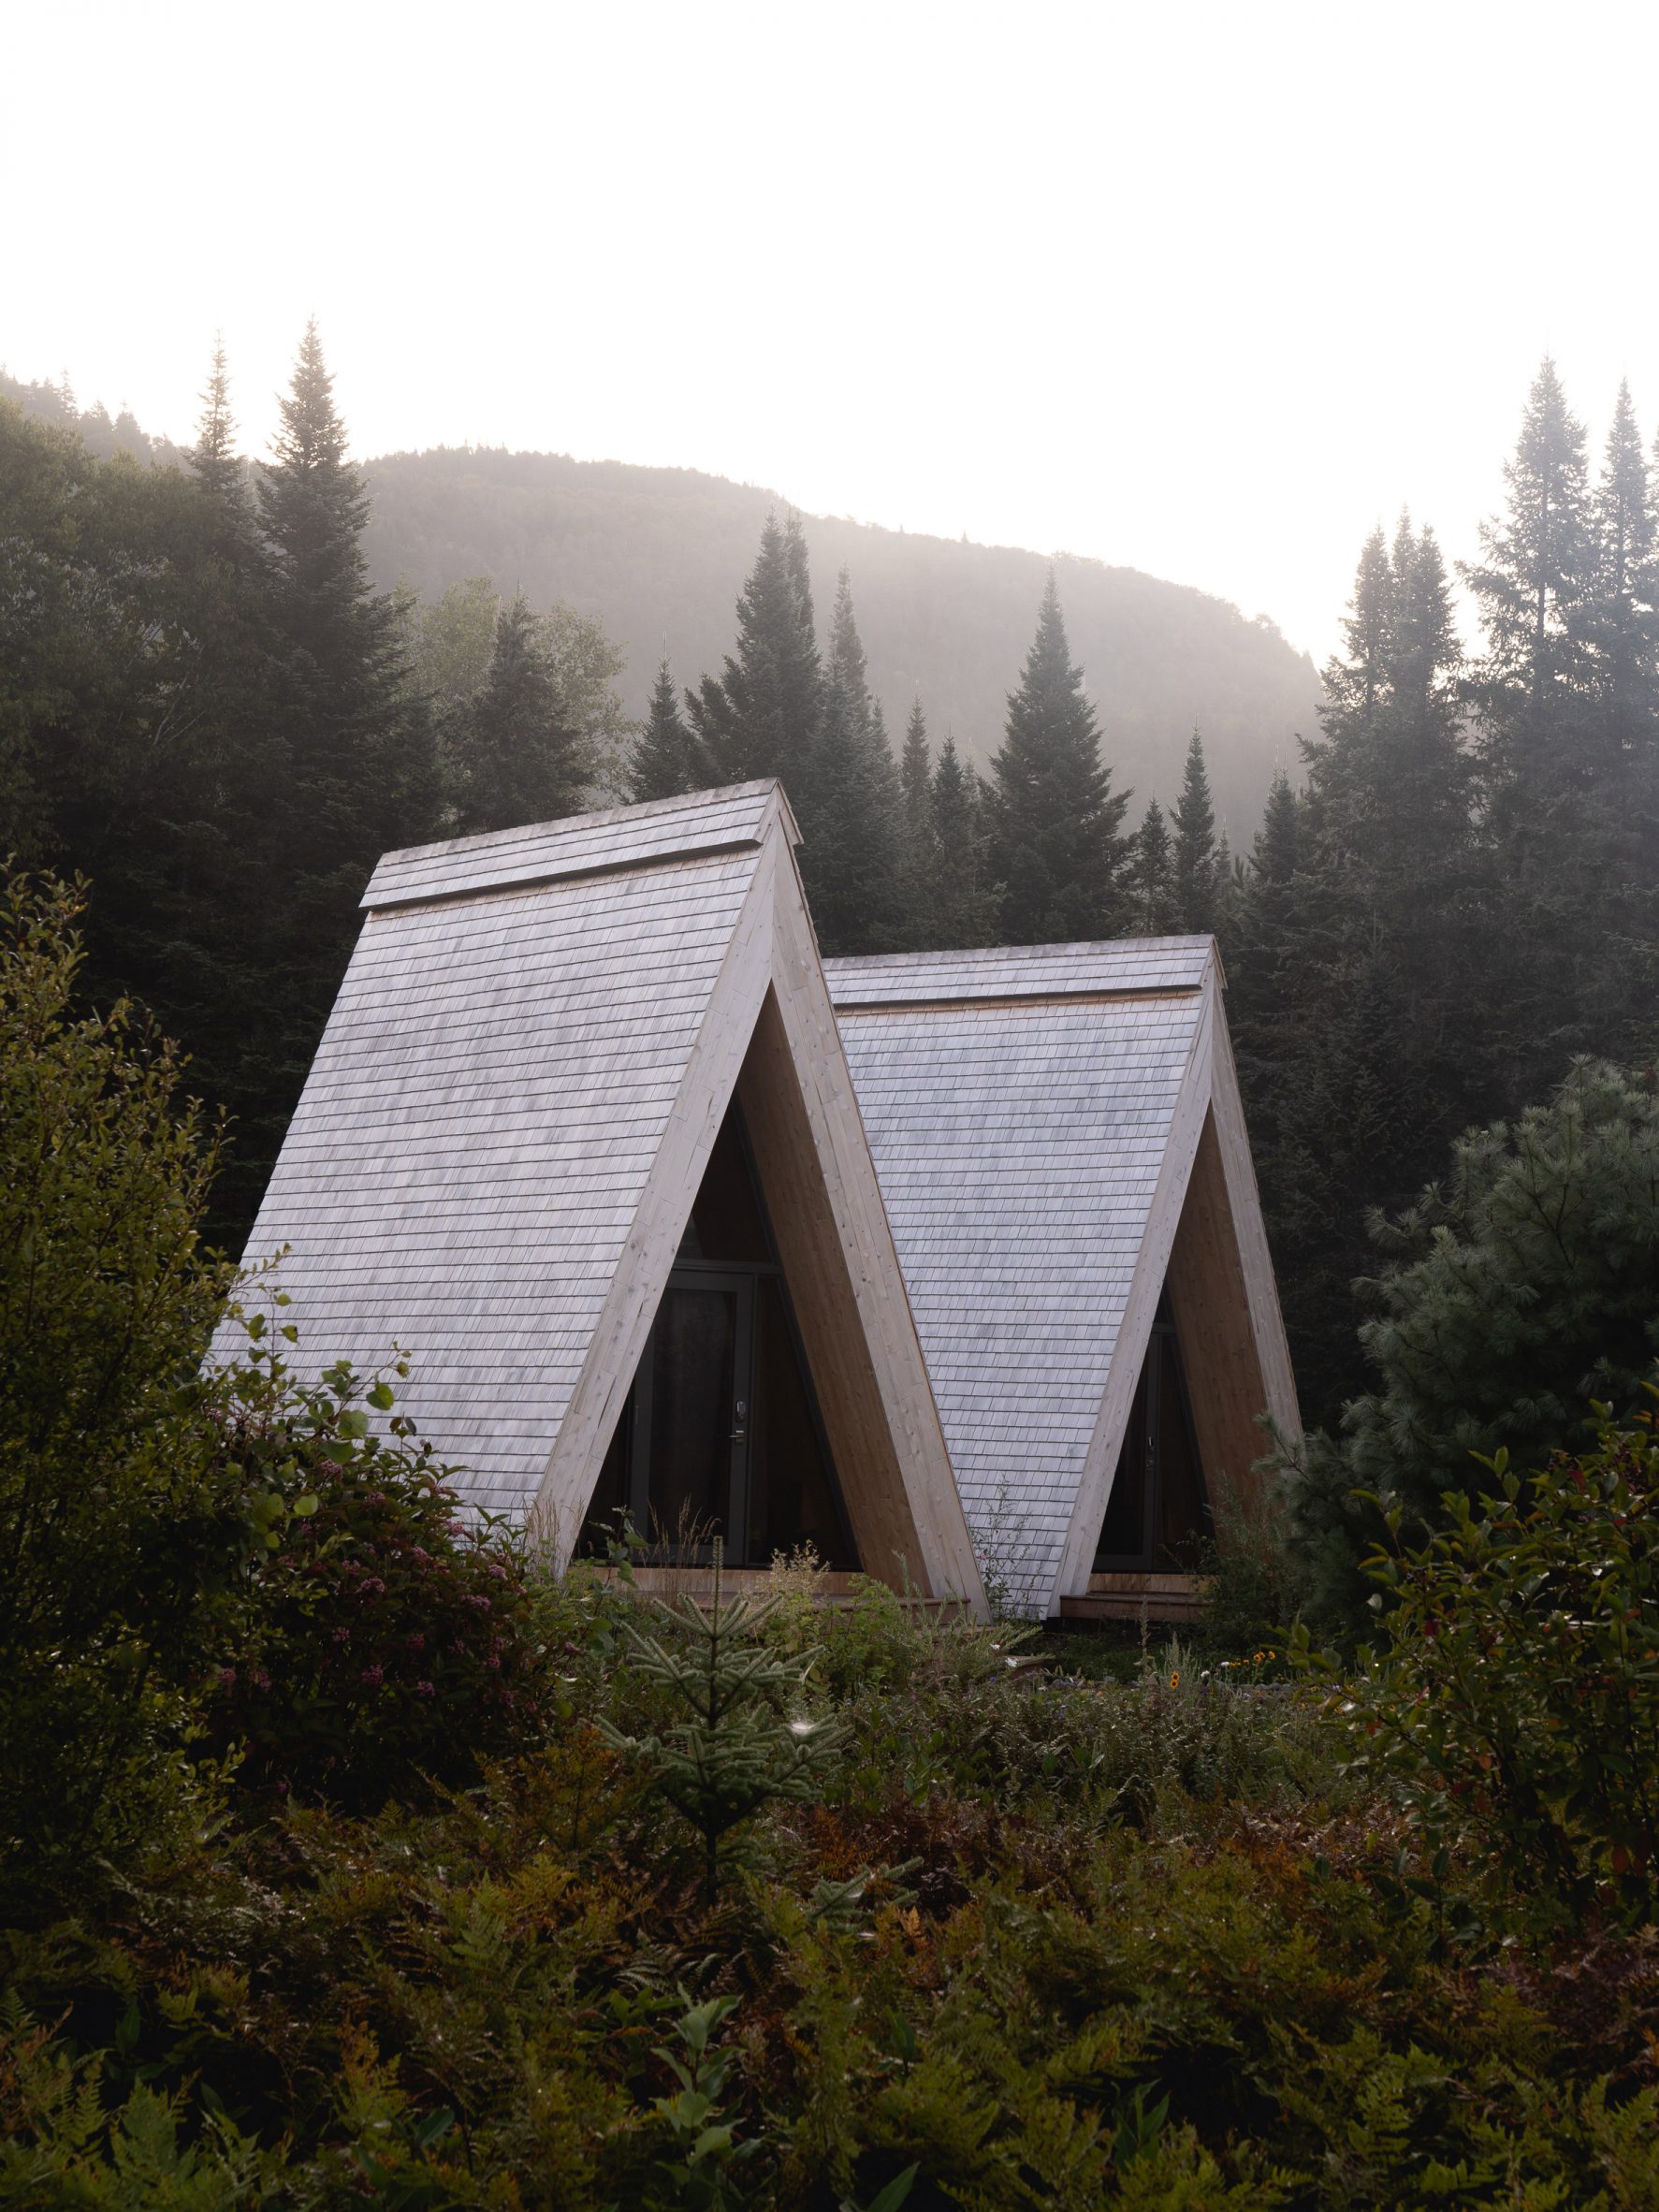 Two A-frame cabin structures in the Canadian woodland